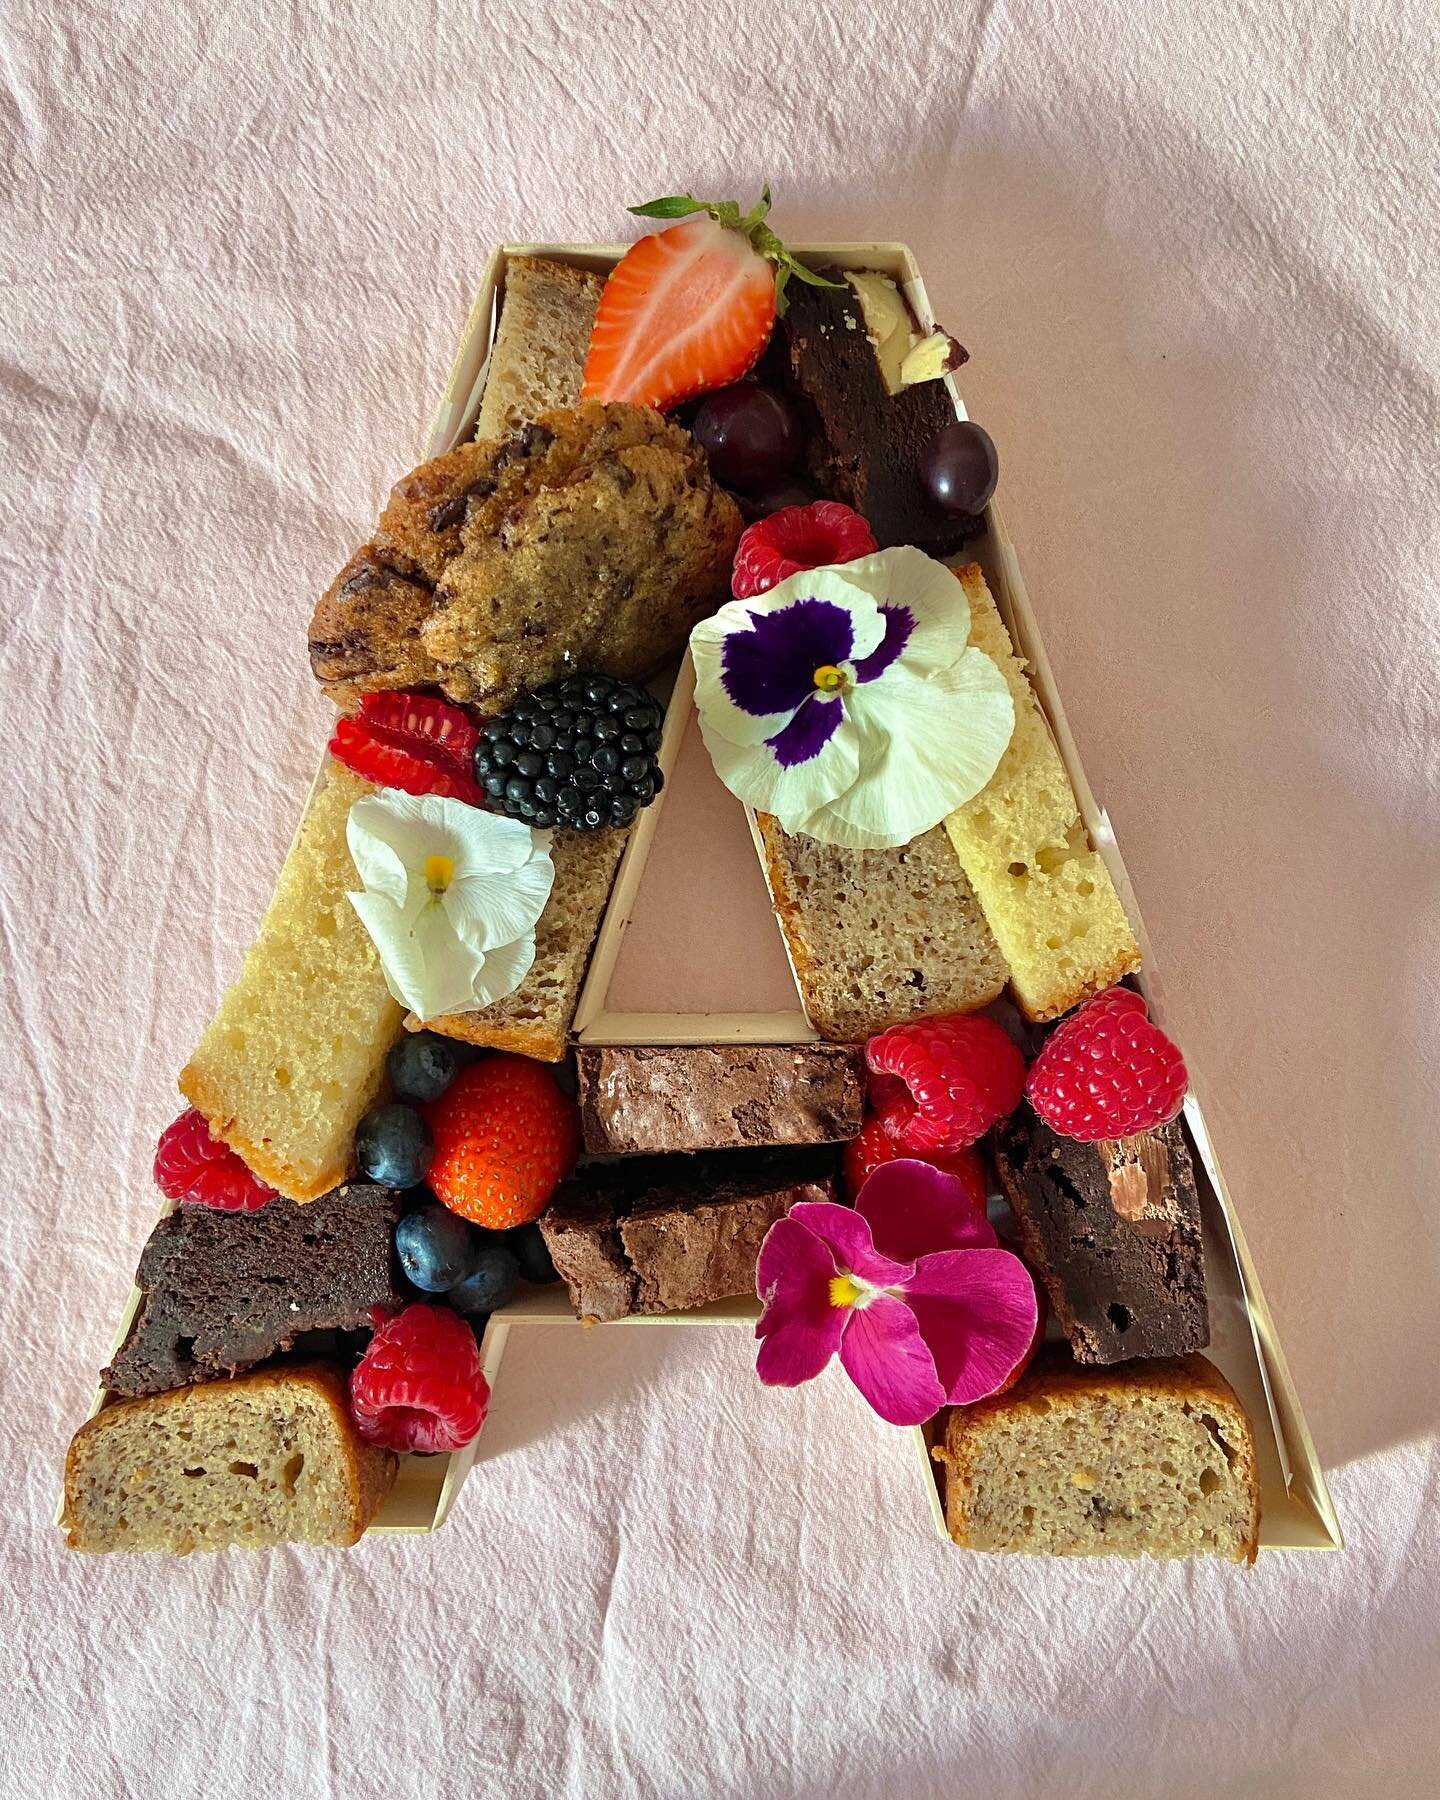 the sweetest bespoke dessert letters 💖 

bamboo letters filled with home baked goodies including triple choc brownies, dark choc chip cookies, banana bread and lemon drizzle. 

decorated with berries and edible flowers 🌸 i&rsquo;m so obsessed!!